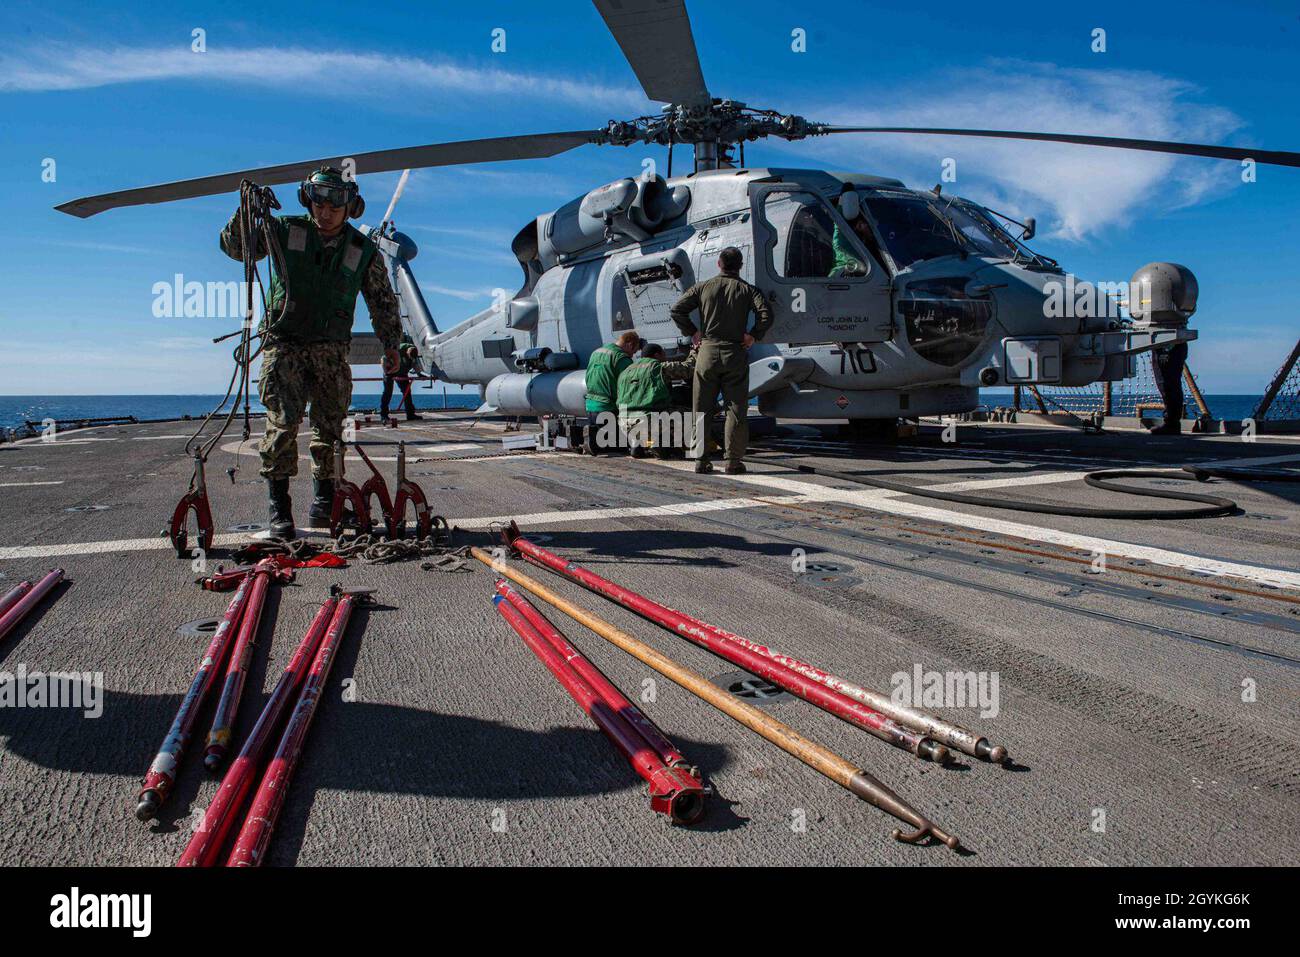 PACIFIC OCEAN (Jan. 18, 2020) Aviation Machinist’s Mate 2nd Class Aaron Delano, from Daly City, Calif., left, arranges blade clamps and restraint bars for securing and stowing an MH-60R Sea Hawk, assigned to the “Wolf Pack” of Helicopter Maritime Strike Squadron (HSM) 75, on the flight deck of the Ticonderoga-class guided-missile cruiser USS Bunker Hill (CG 52) Jan. 18, 2020. Bunker Hill, part of the Theodore Roosevelt Carrier Strike Group, is on a scheduled deployment to the Indo-Pacific. (U.S. Navy photo by Mass Communication Specialist 3rd Class Nicholas V. Huynh) Stock Photo